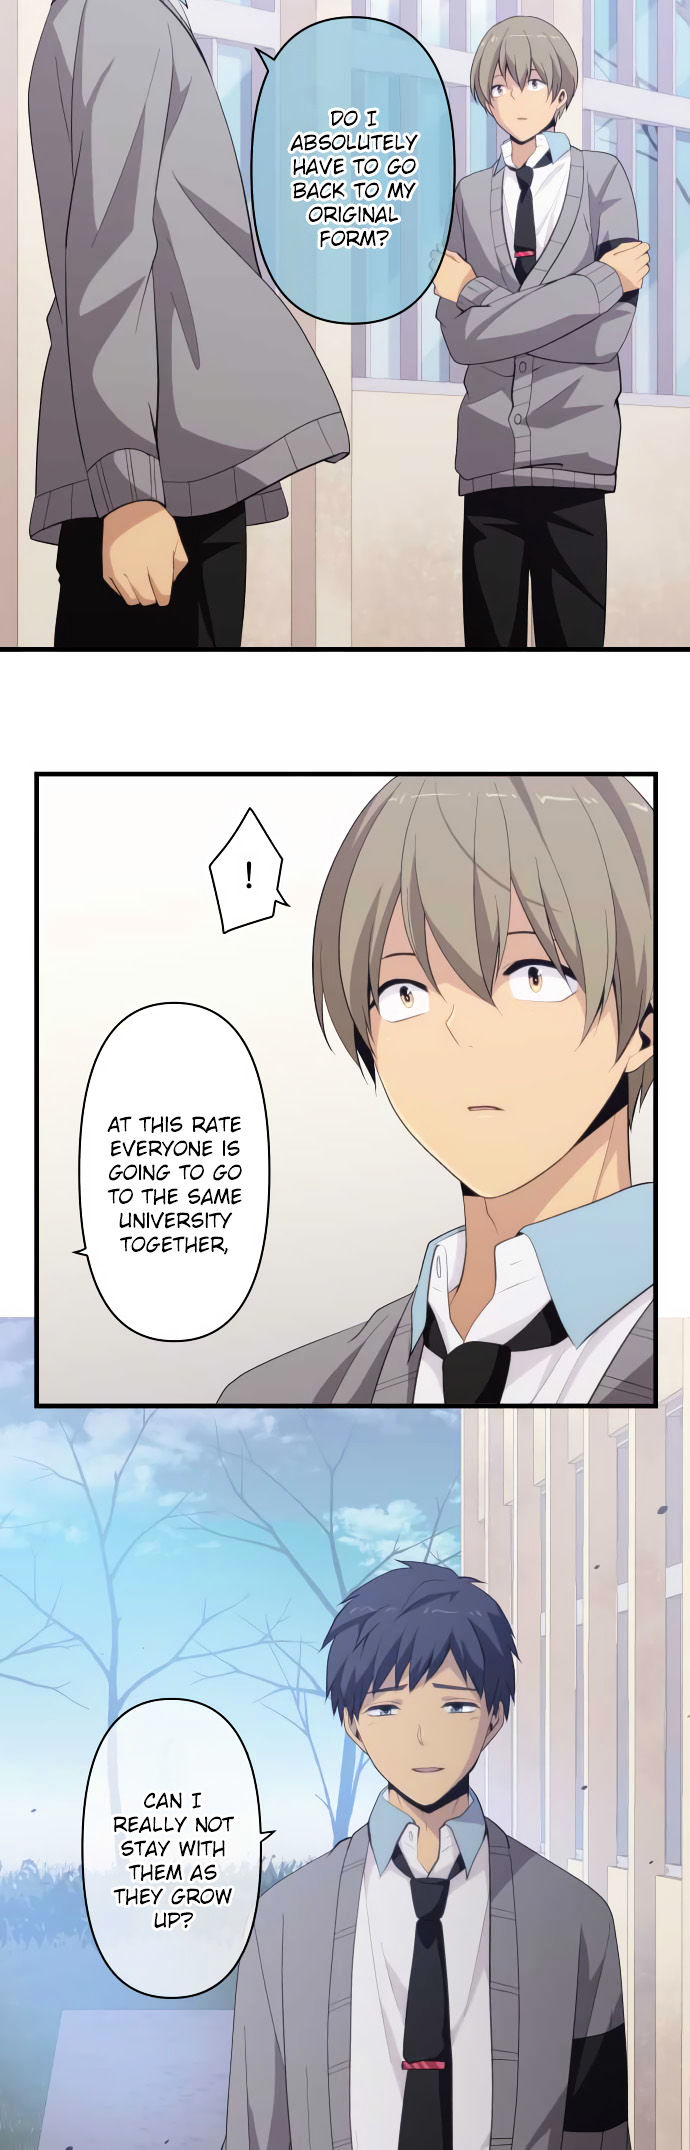 Relife 205 3